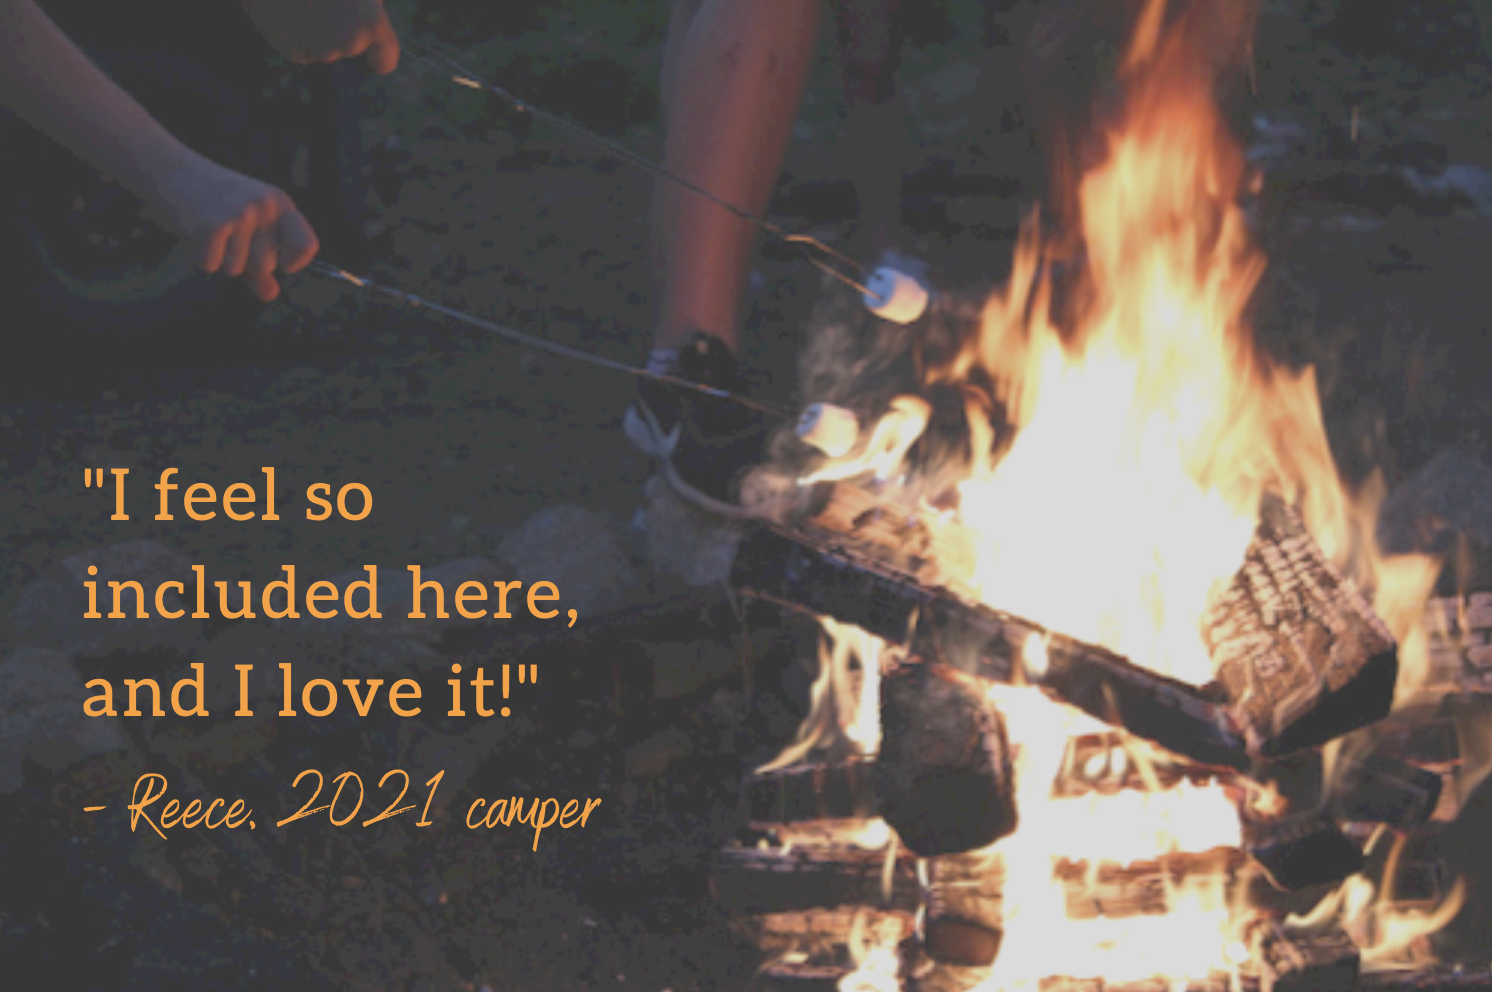 campfire with quote: I feel so included here and I love it!